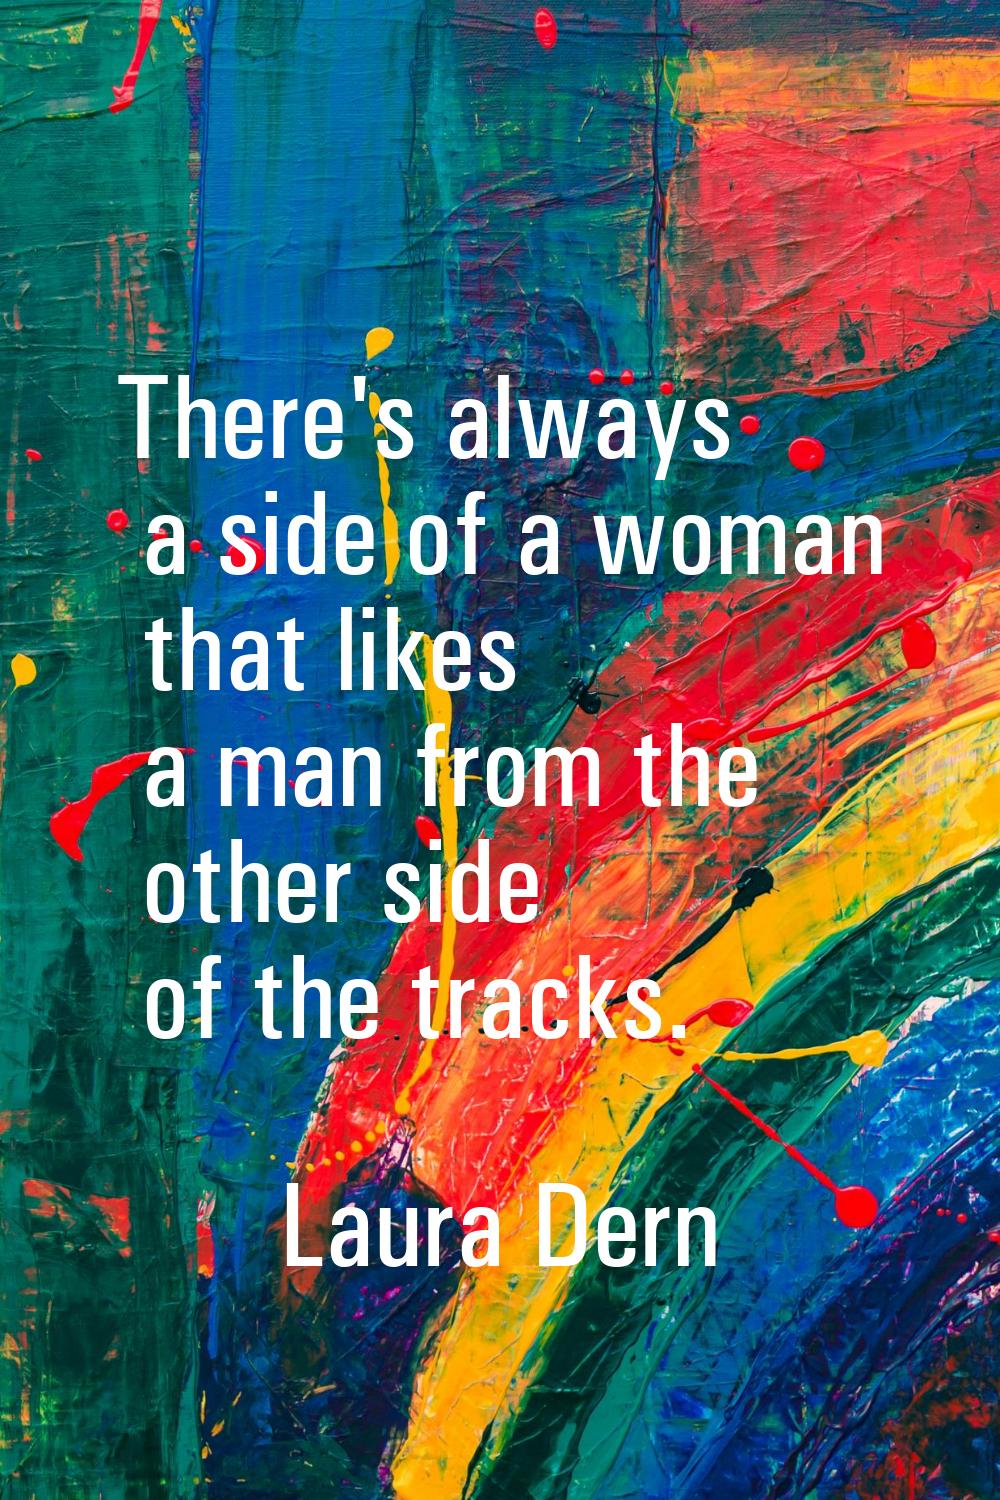 There's always a side of a woman that likes a man from the other side of the tracks.